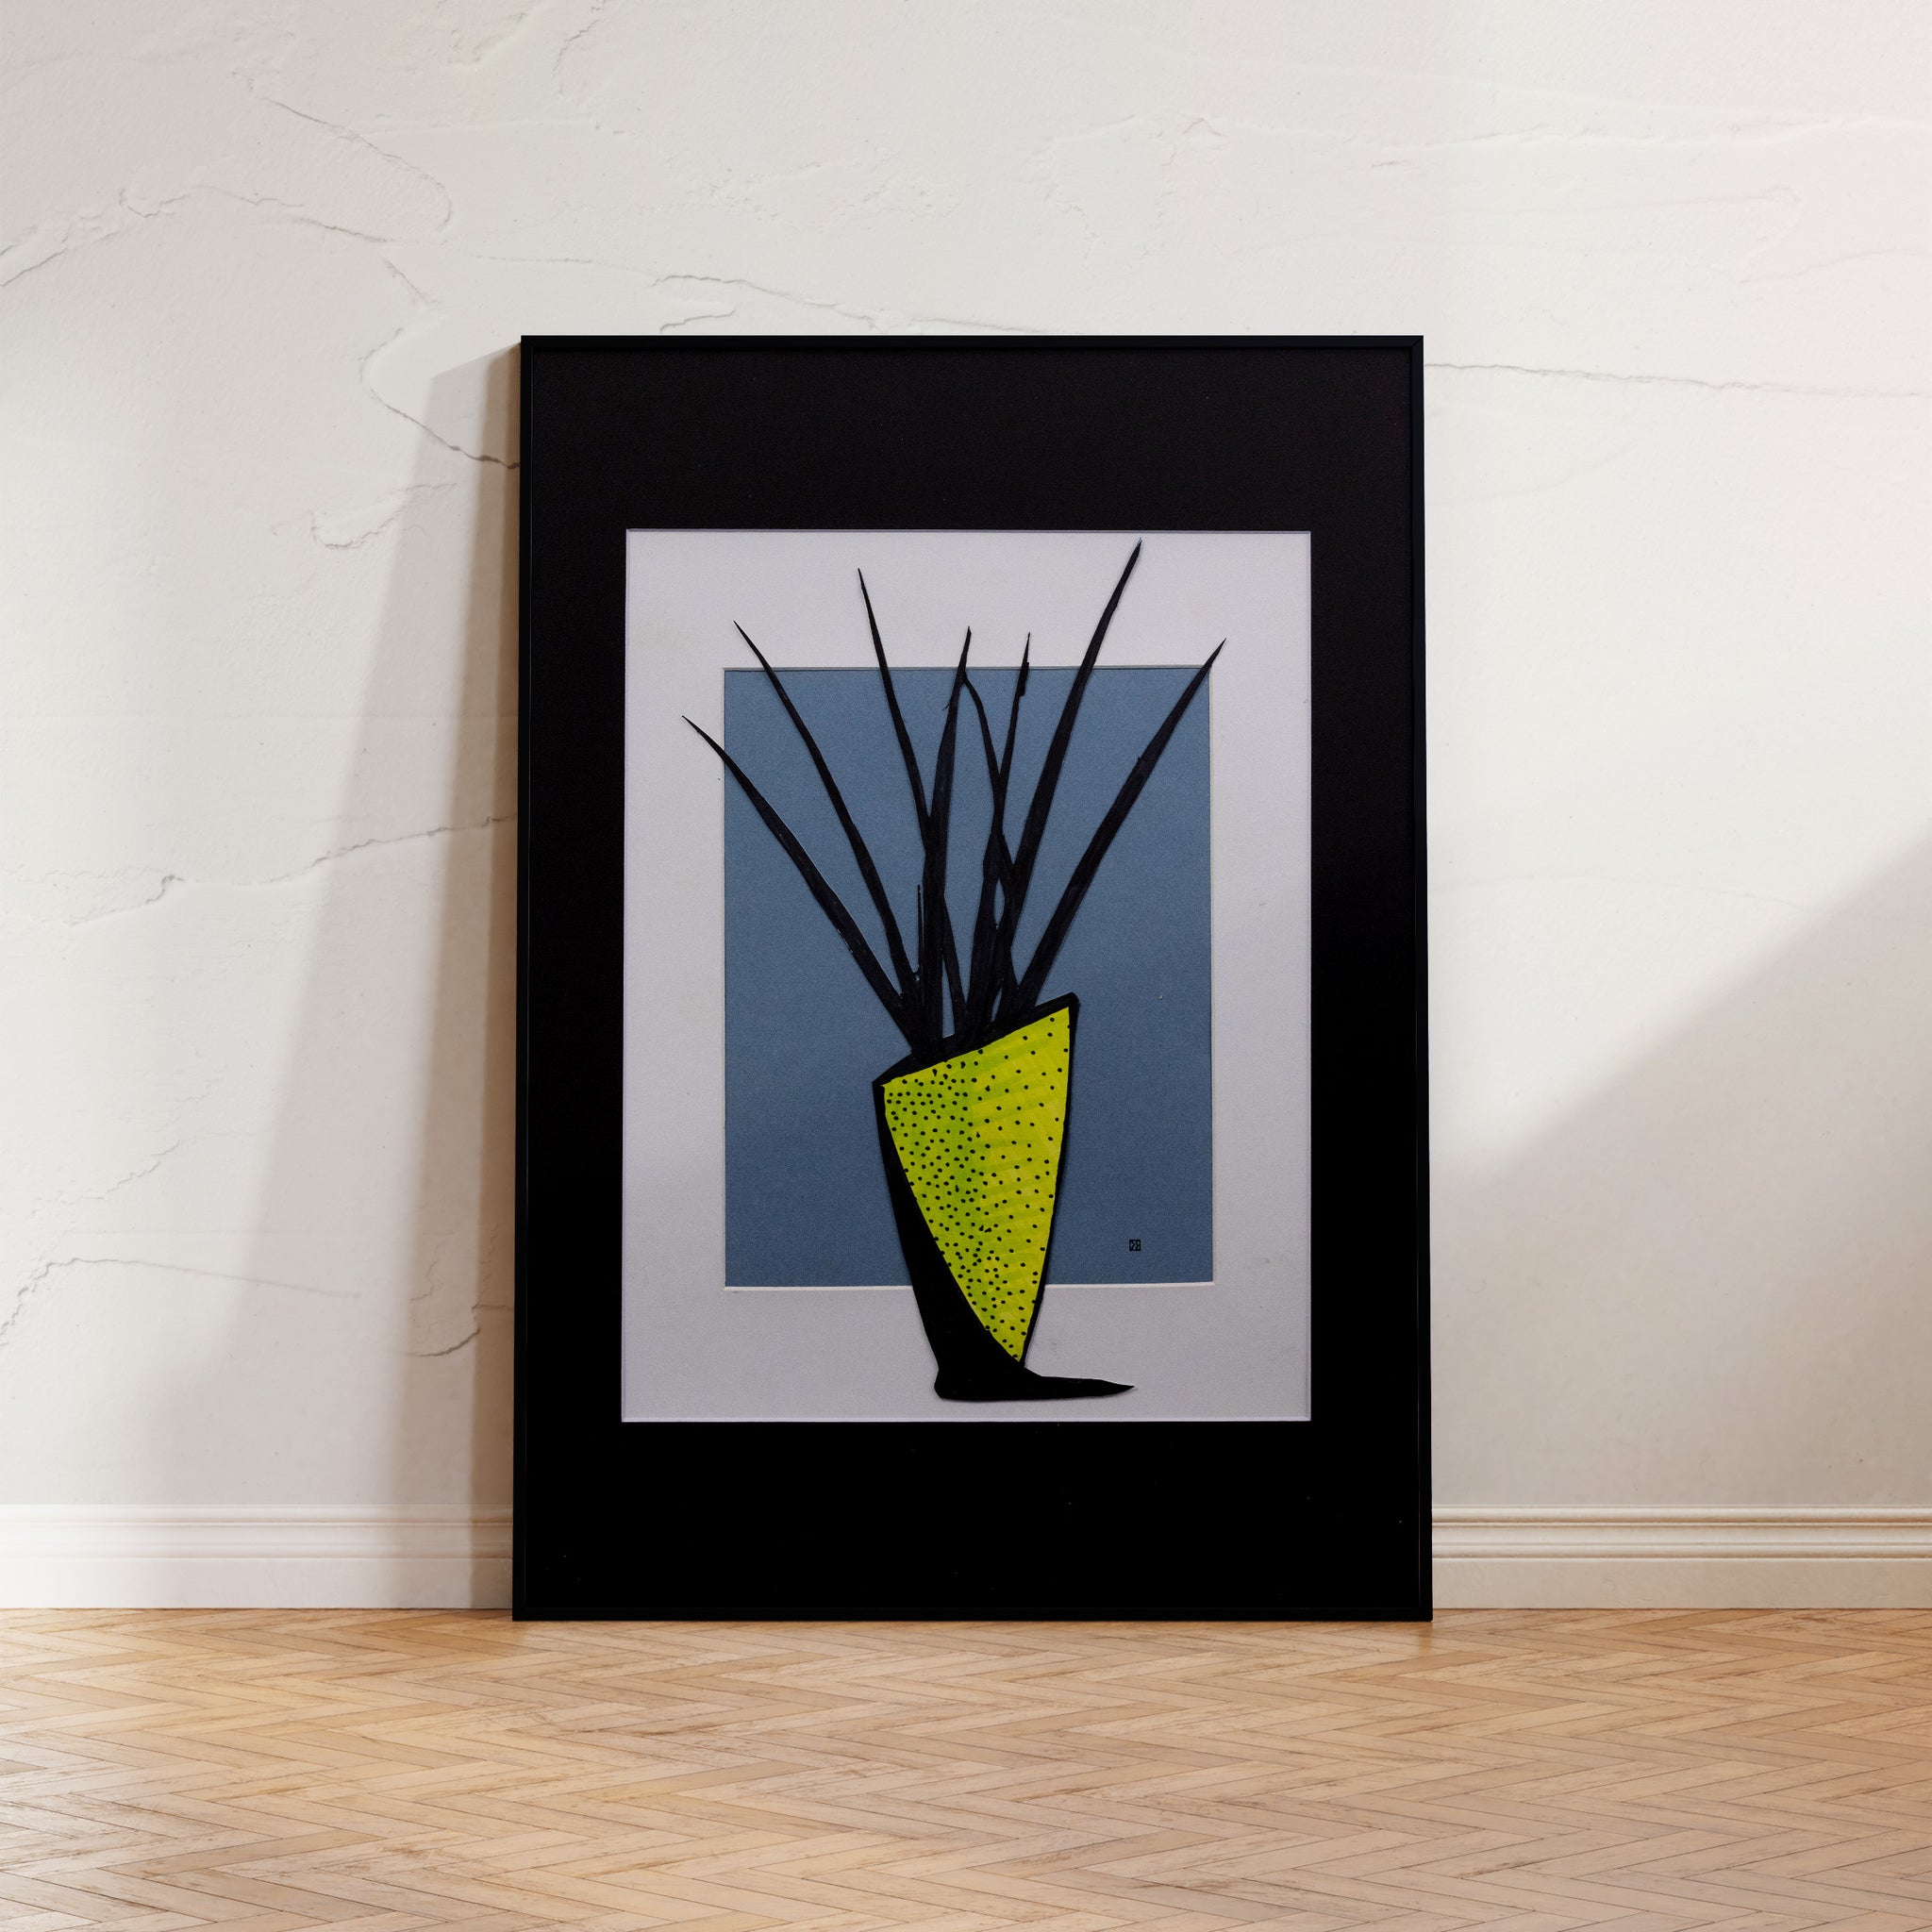 Photorealistic yellow vase on a light green background in the "Gilded Glints" print, showcasing a modern take on traditional still life.